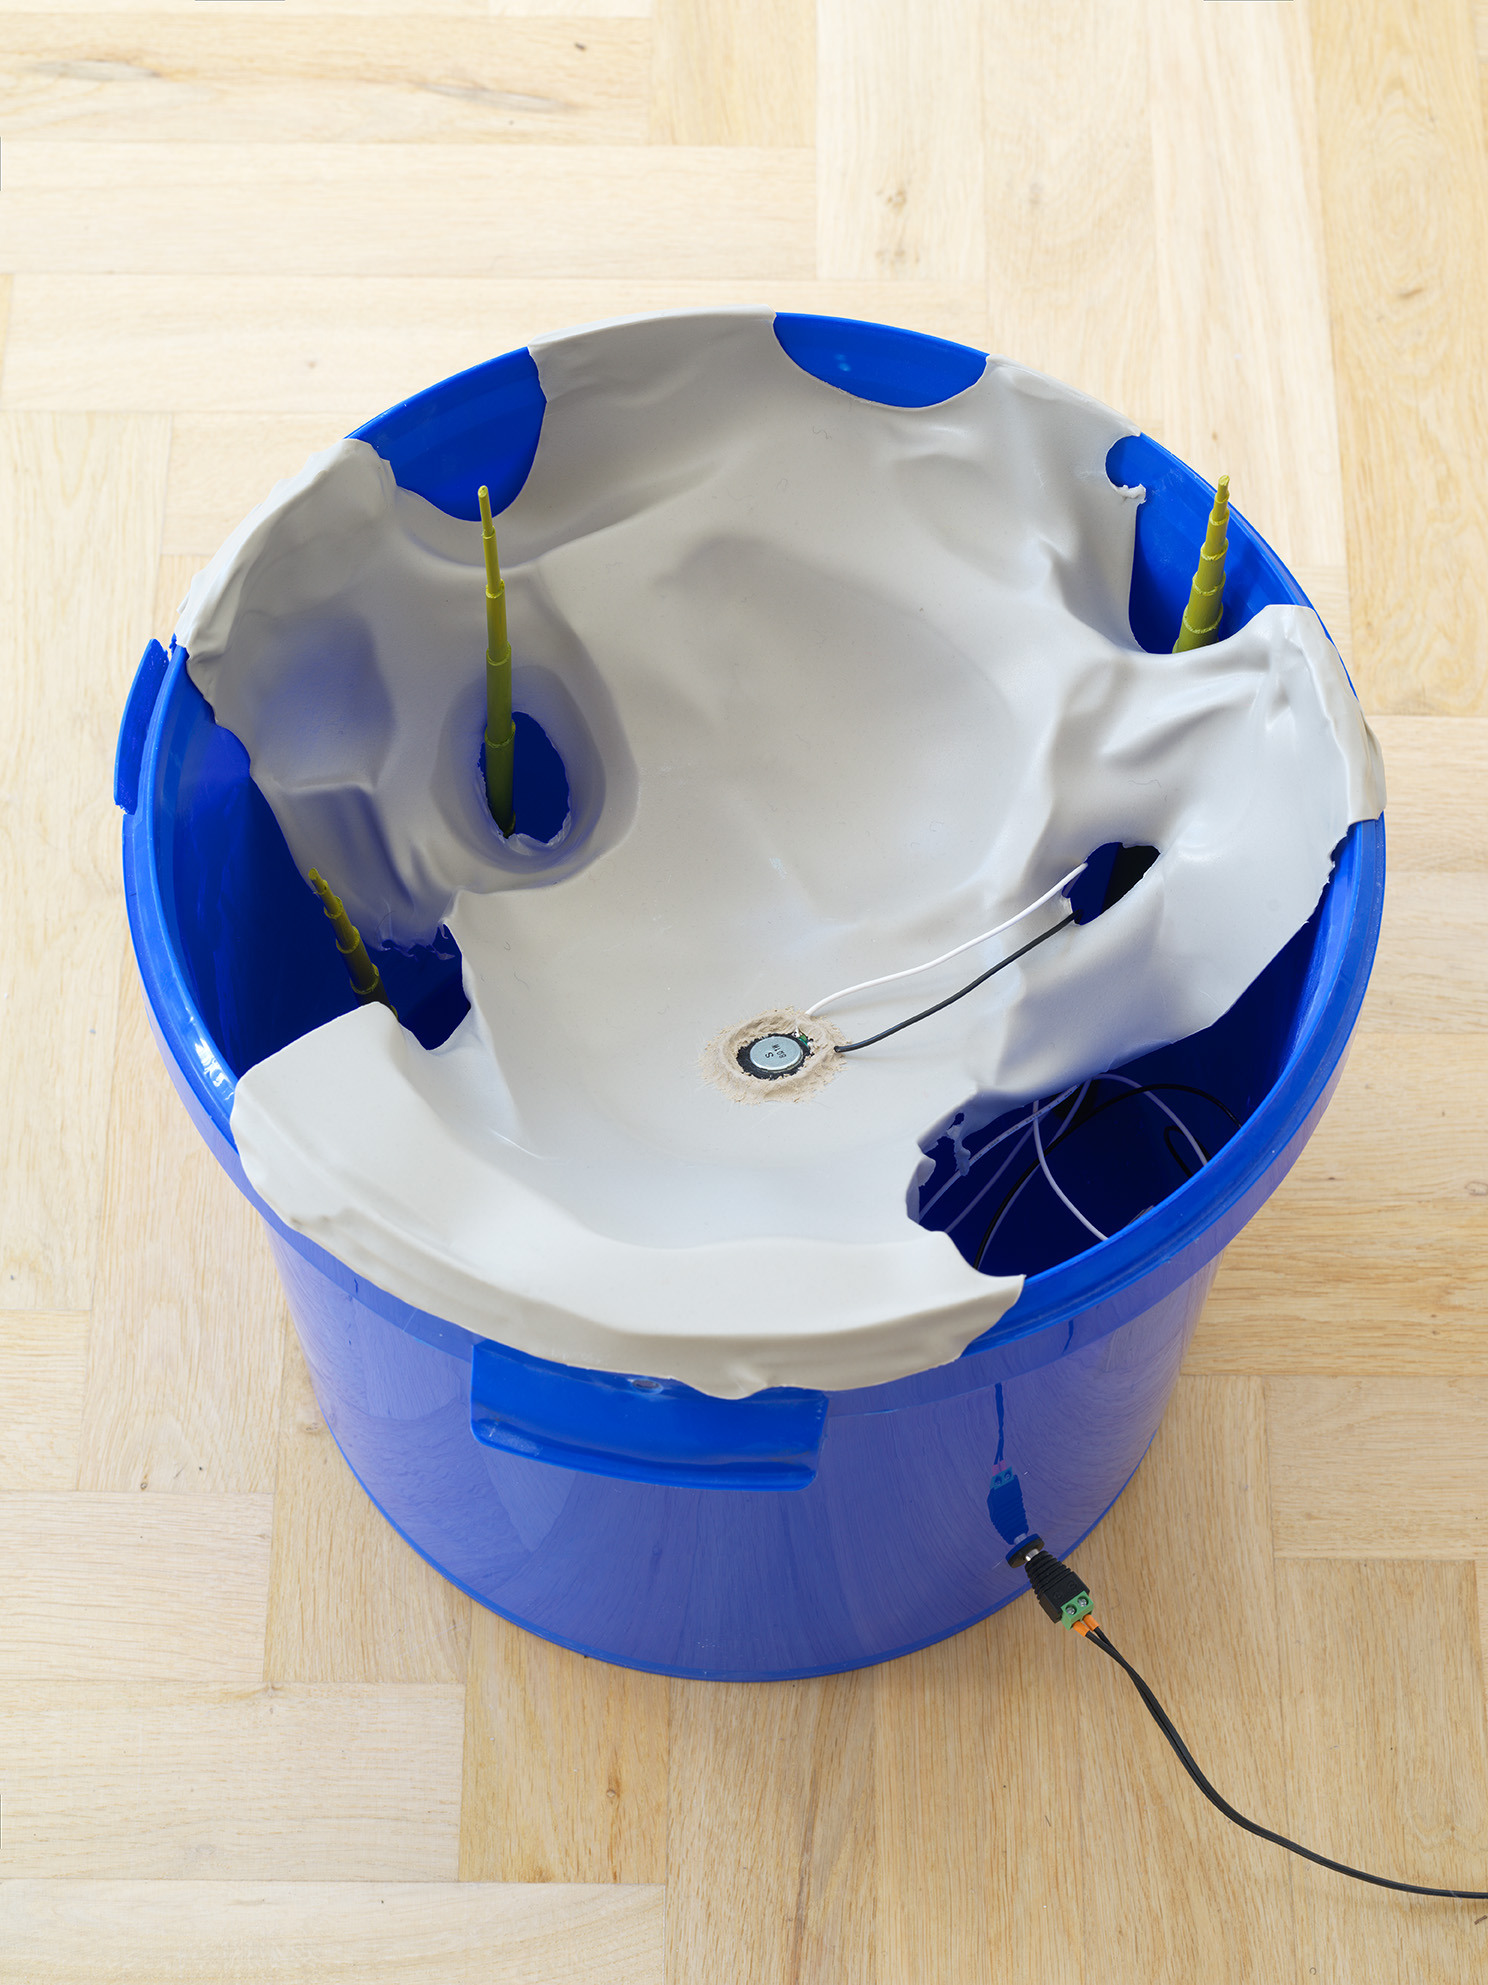 Becket MWN: Tuner (detail), 2023. Buckets, plastic, mp3 player, speaker, acrylic paint. dimensions variable